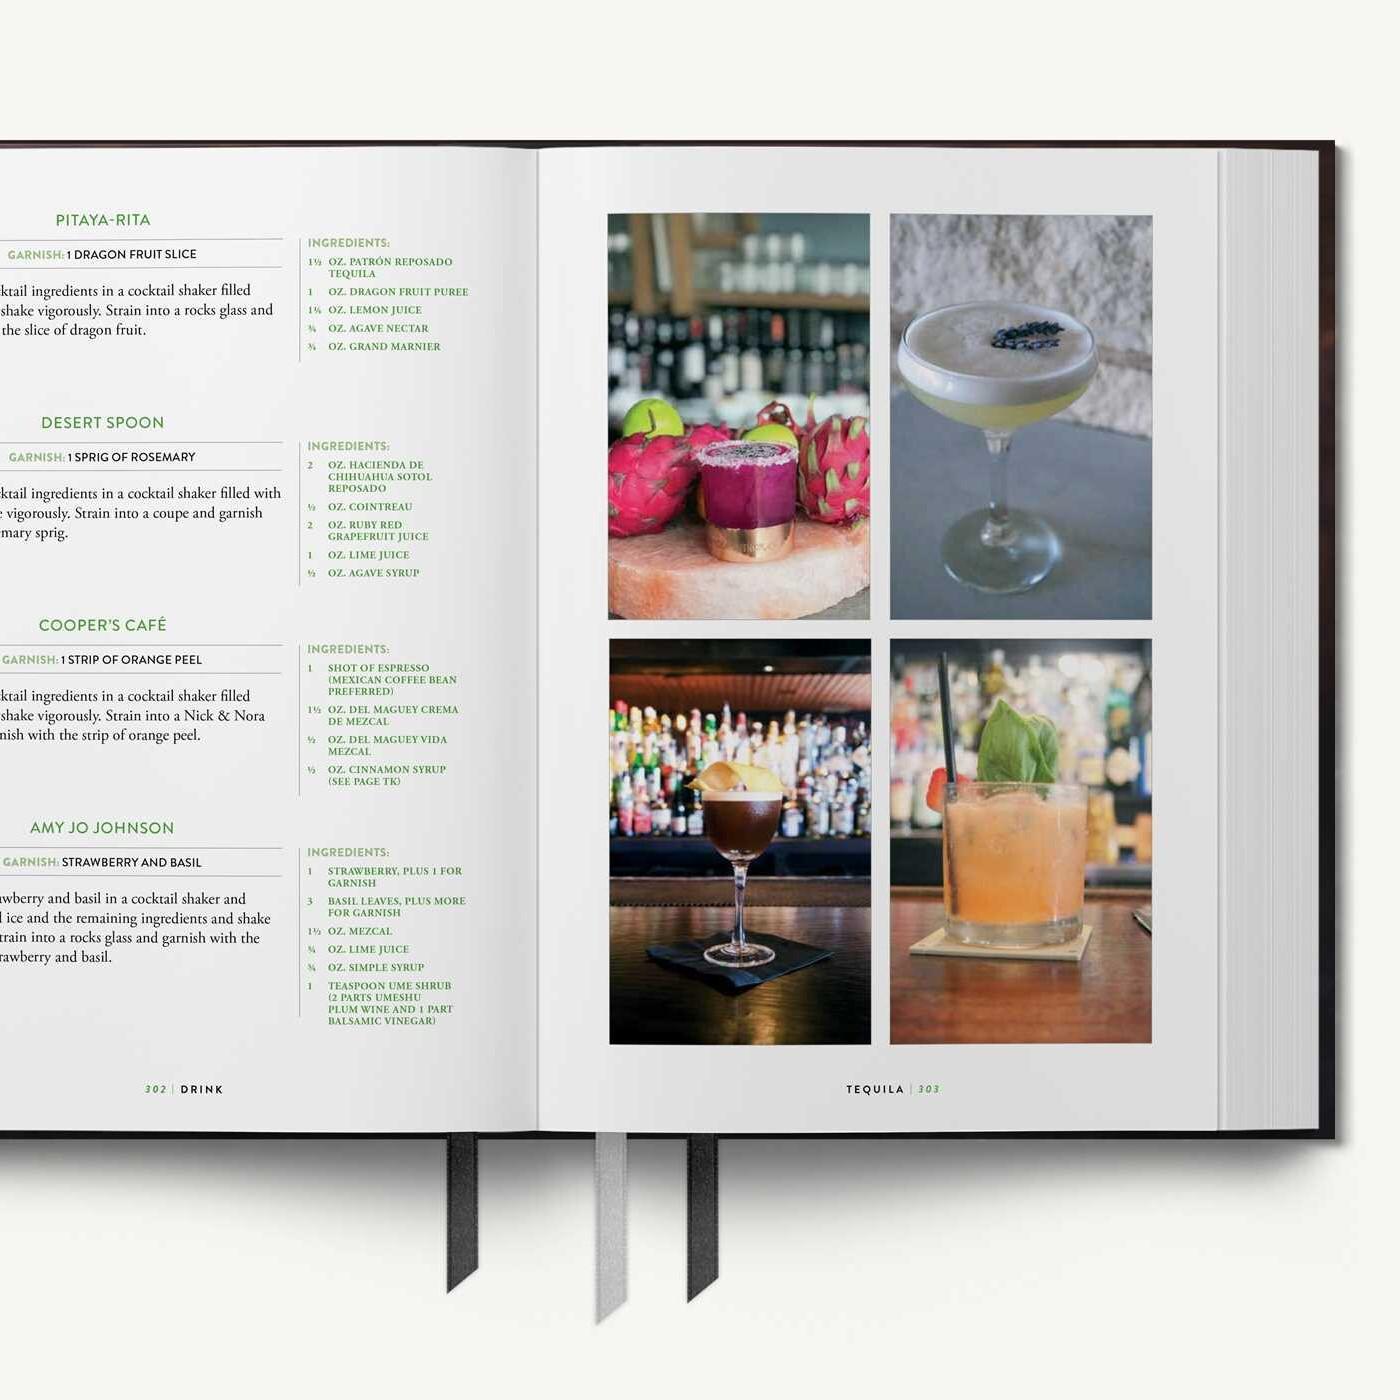 Book - Drink: The Ultimate Cocktail Book